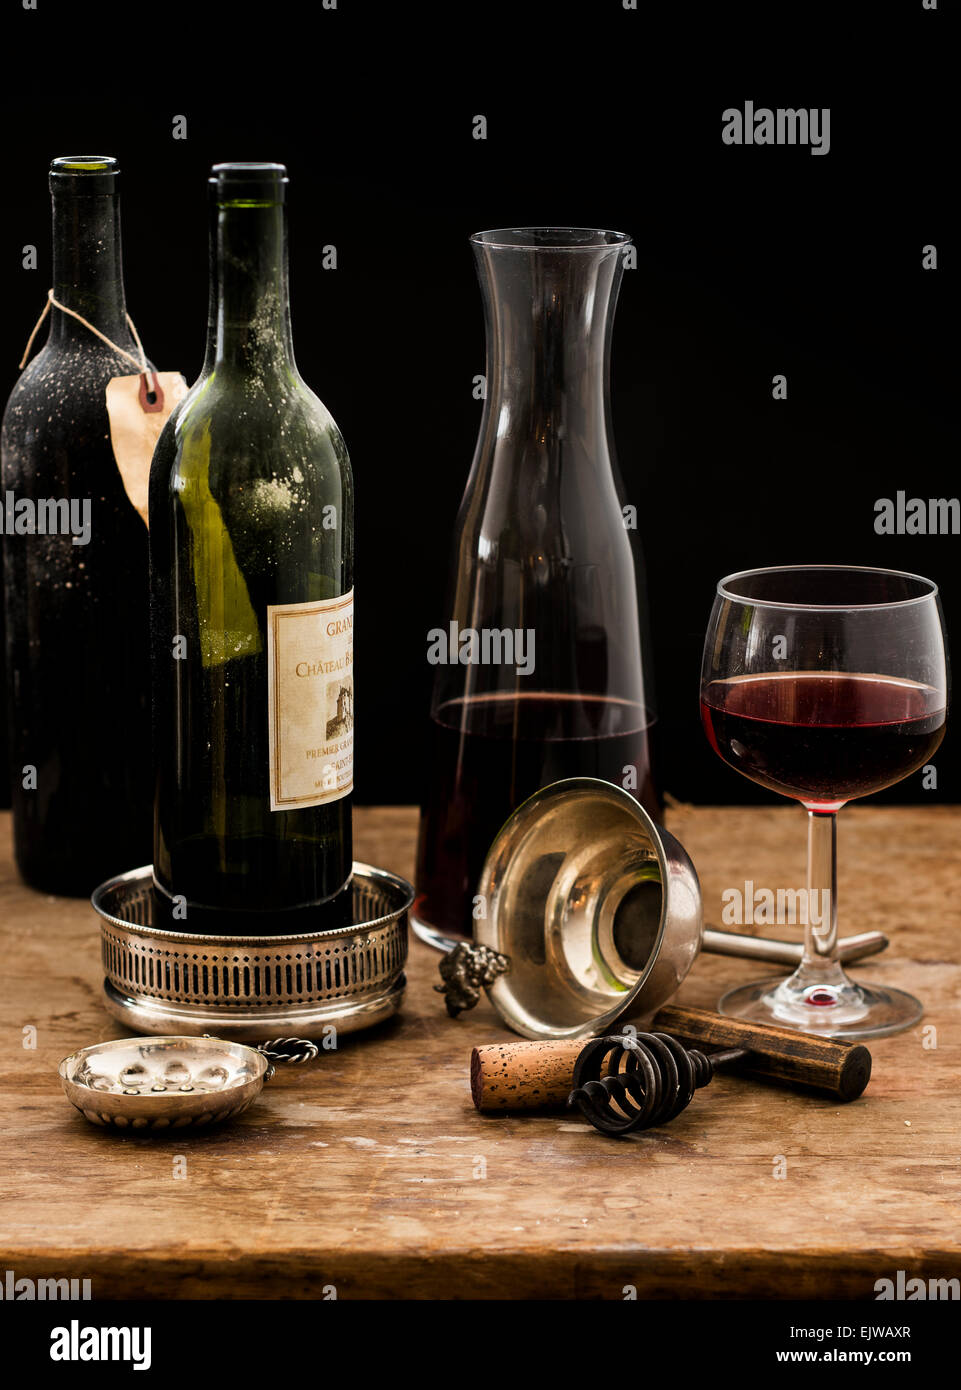 Still life with red wine glass, carafe and bottles on wooden table, studio shot Stock Photo